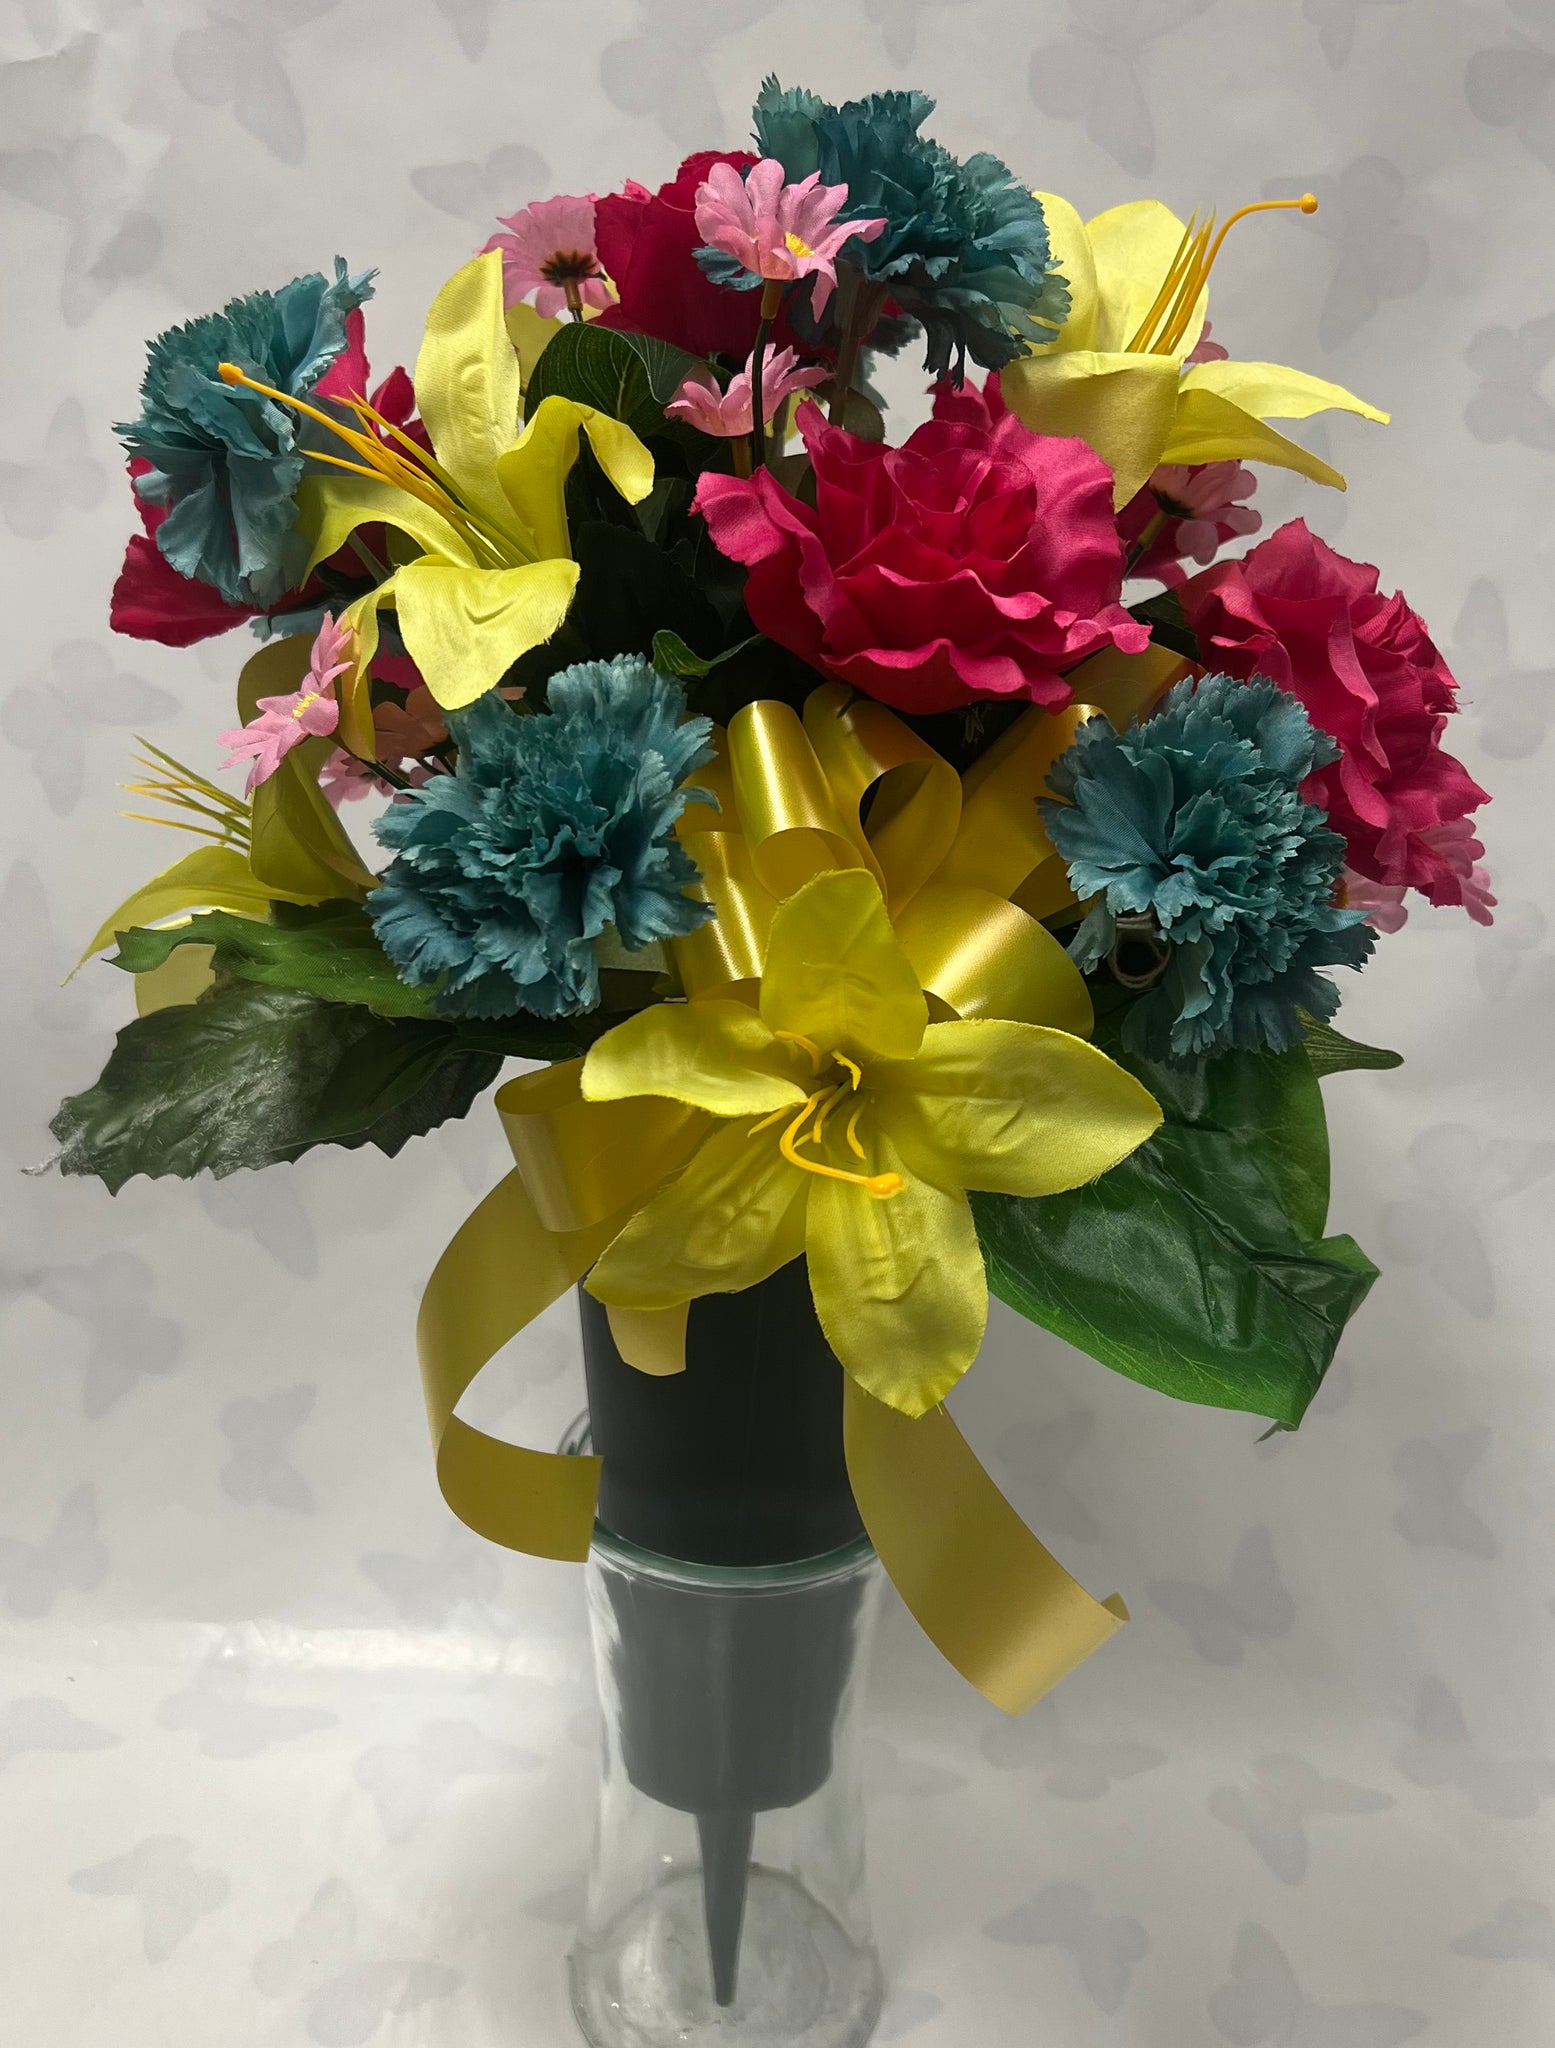 Artificial Cemetery Vase -Yellow, Hot Pink, Turquoise and Soft Pink